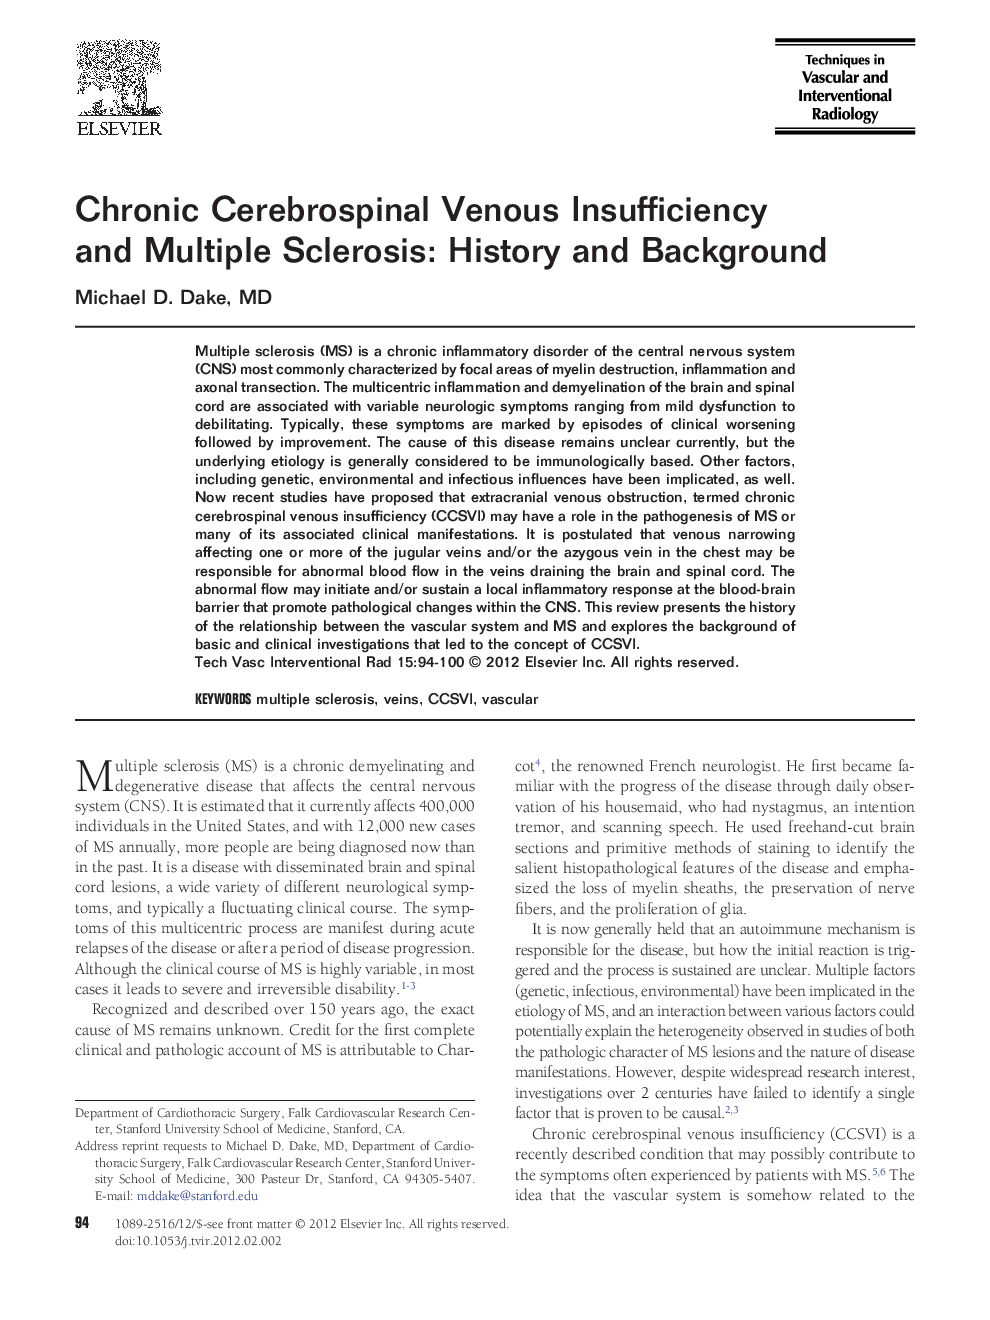 Chronic Cerebrospinal Venous Insufficiency and Multiple Sclerosis: History and Background